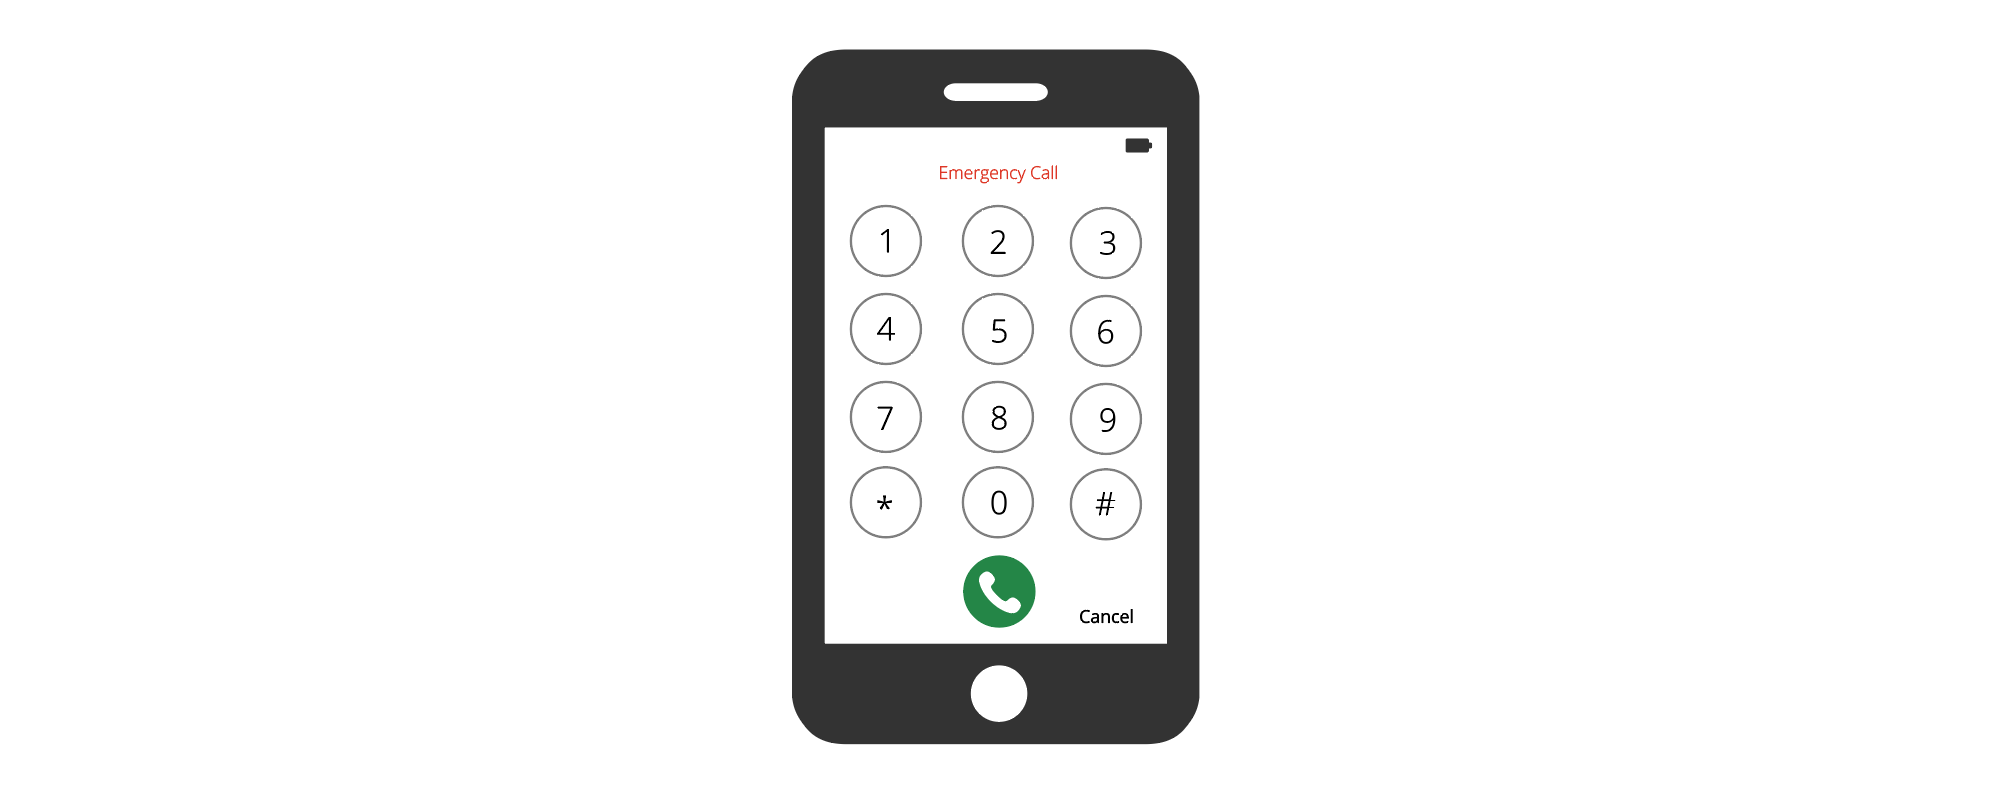 Illustration of iPhone emergency dial screen